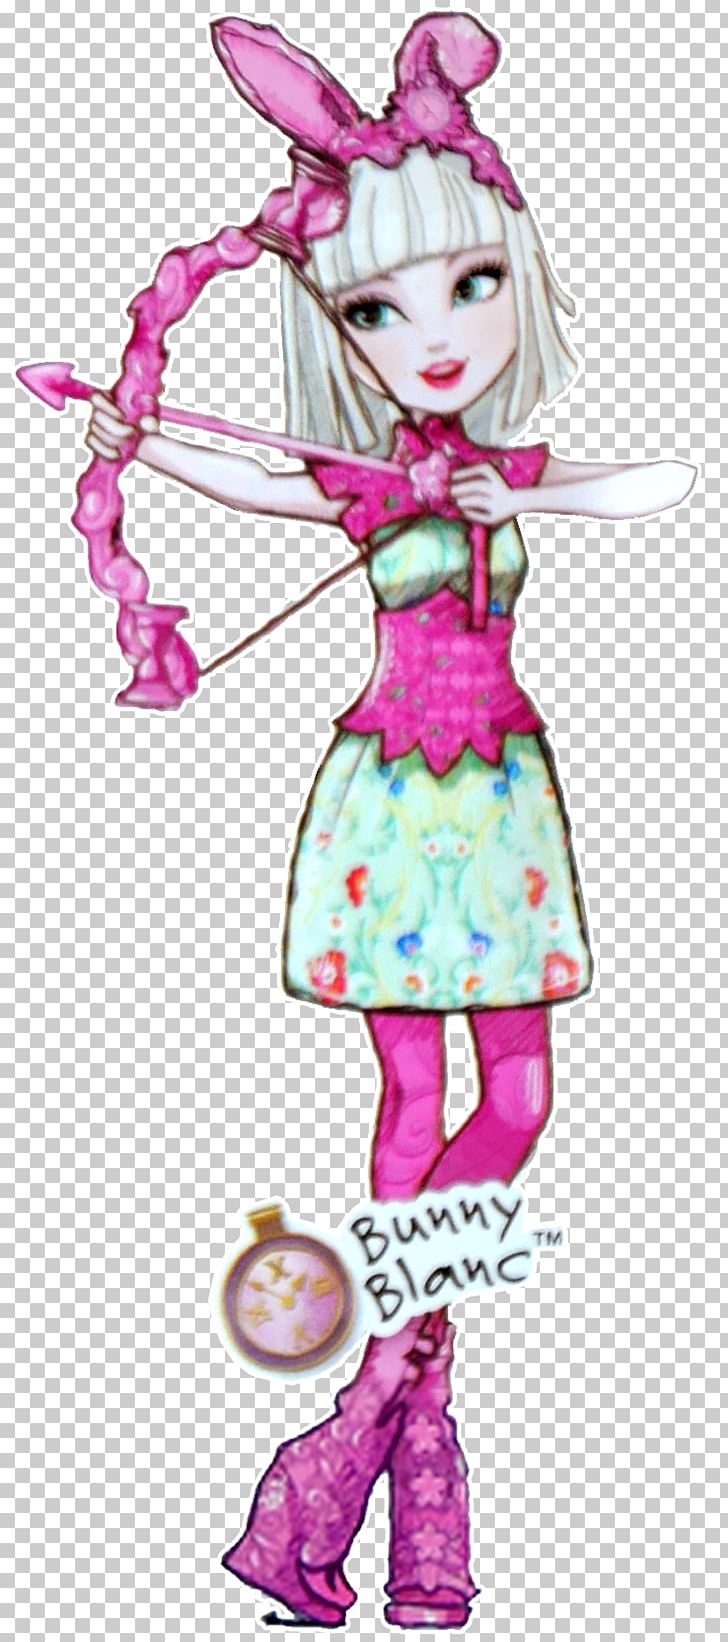 Ever After High Archery Monster High Drawing PNG, Clipart, Archery, Arrow, Art, Bow, Bow And Arrow Free PNG Download